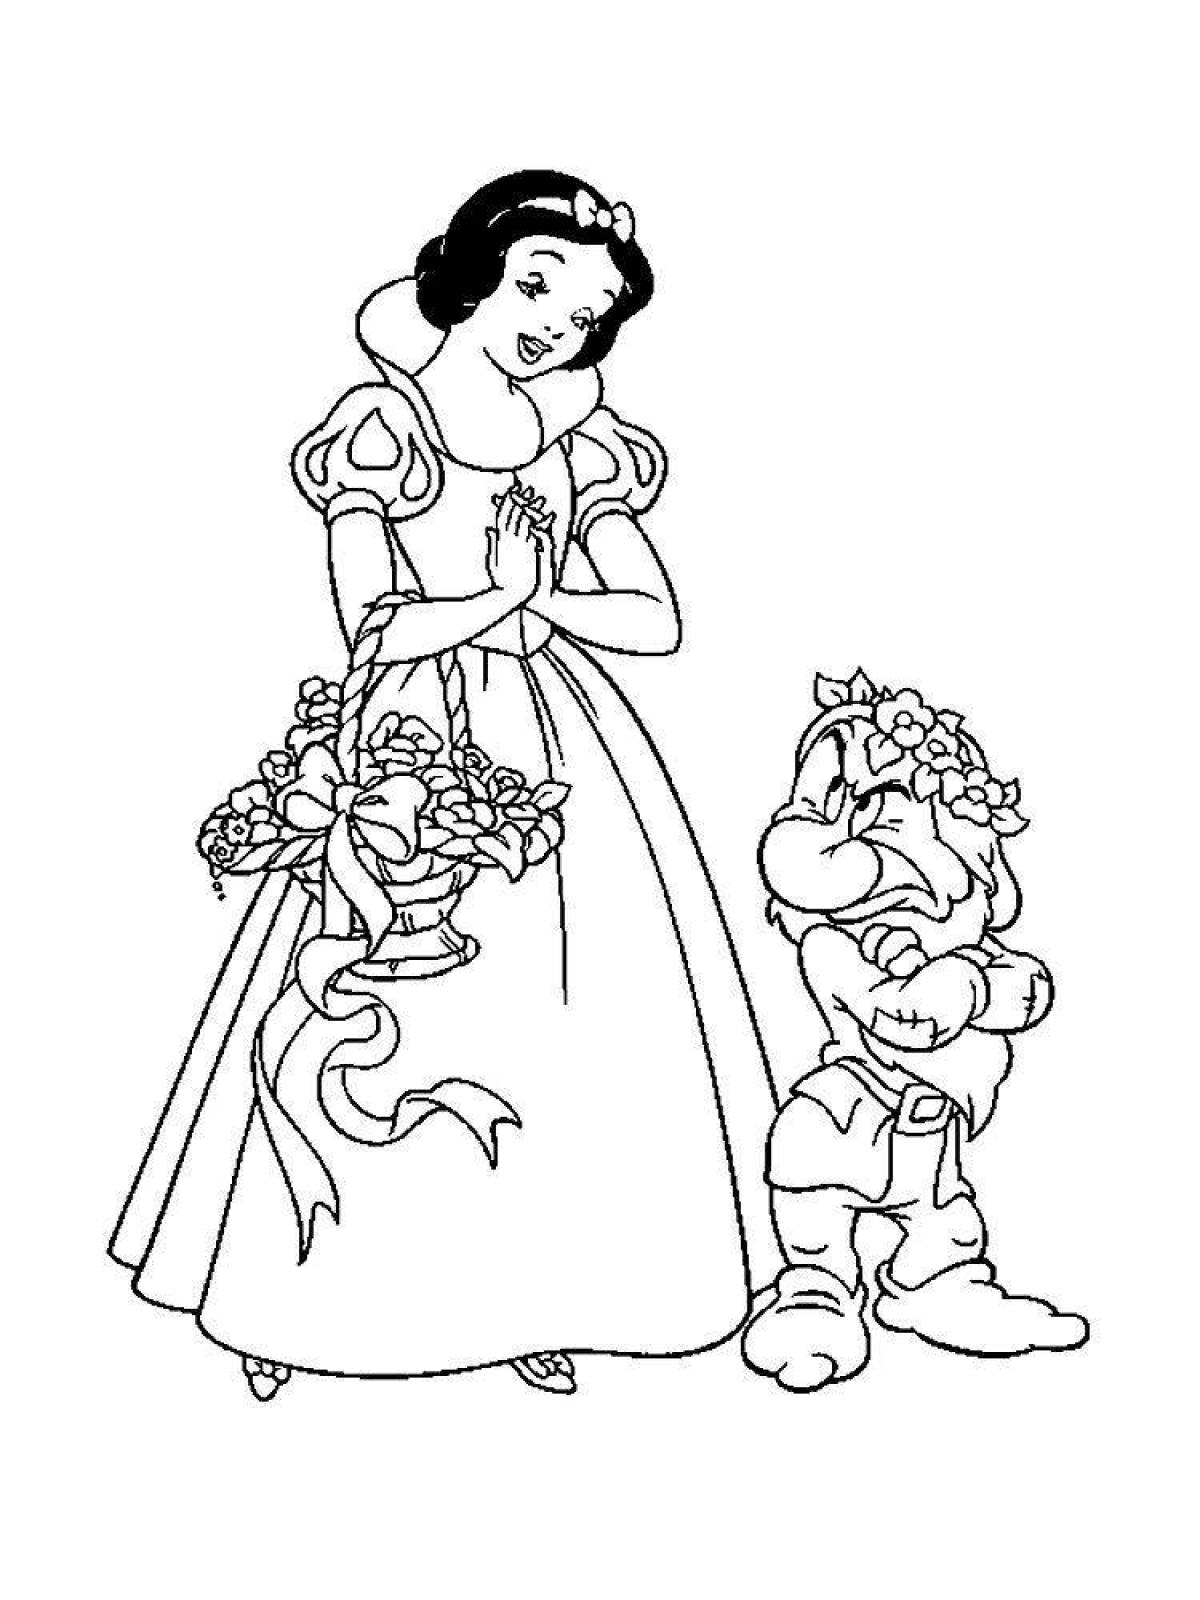 Amazing snow white and 7 dwarfs coloring book